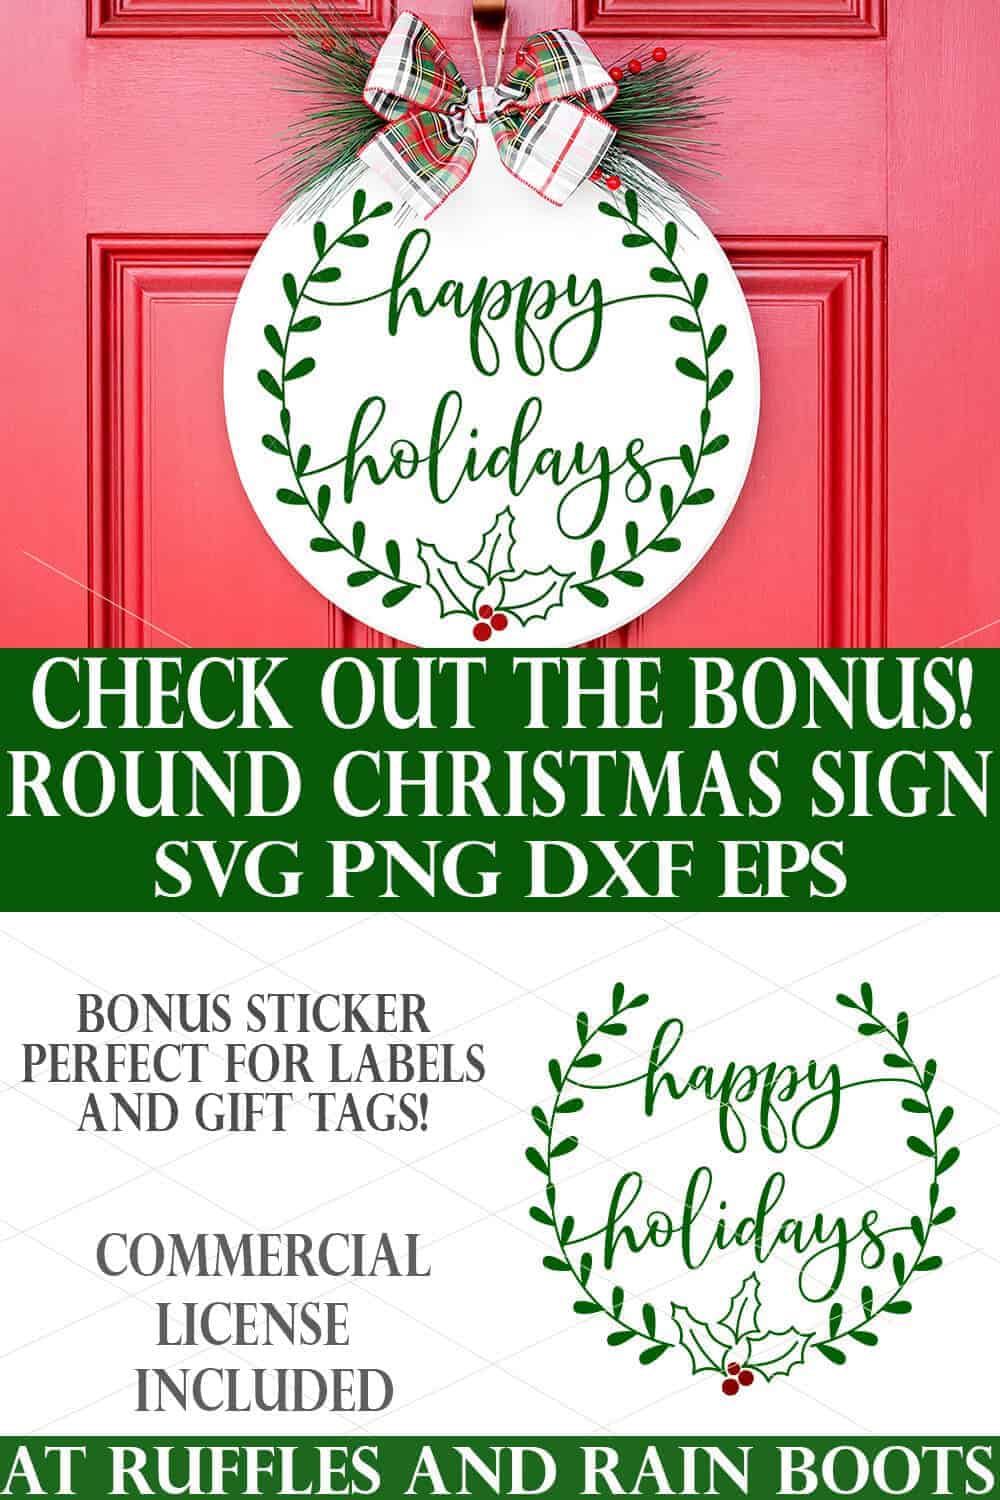 split image showing happy holidays svg on wood round Christmas sign with plaid bow on a red door with text which reads check out the bonus round Christmas sign svg png dxf eps